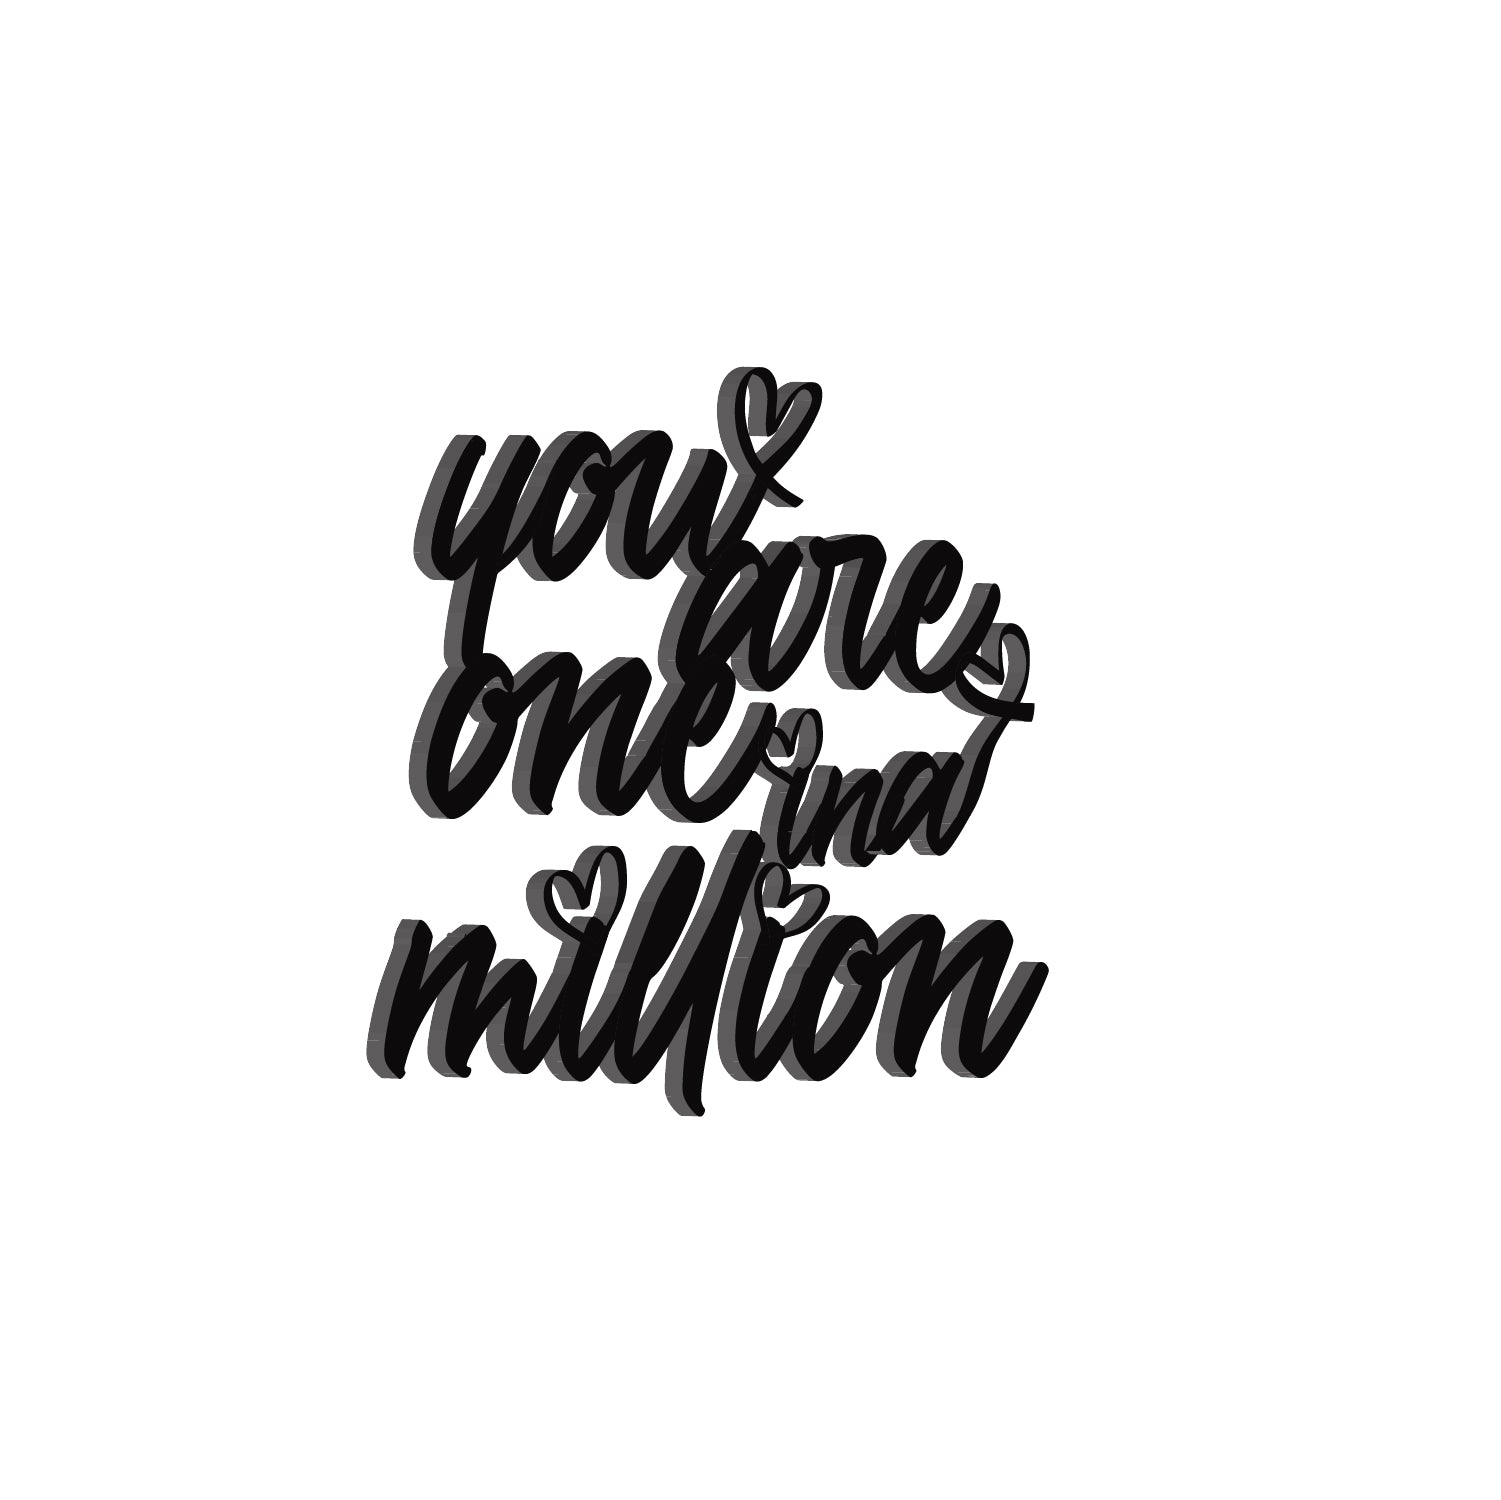 "You Are One In A Million" Love Theme Black Engineered Wood Wall Art Cutout, Ready to Hang Home Decor 4